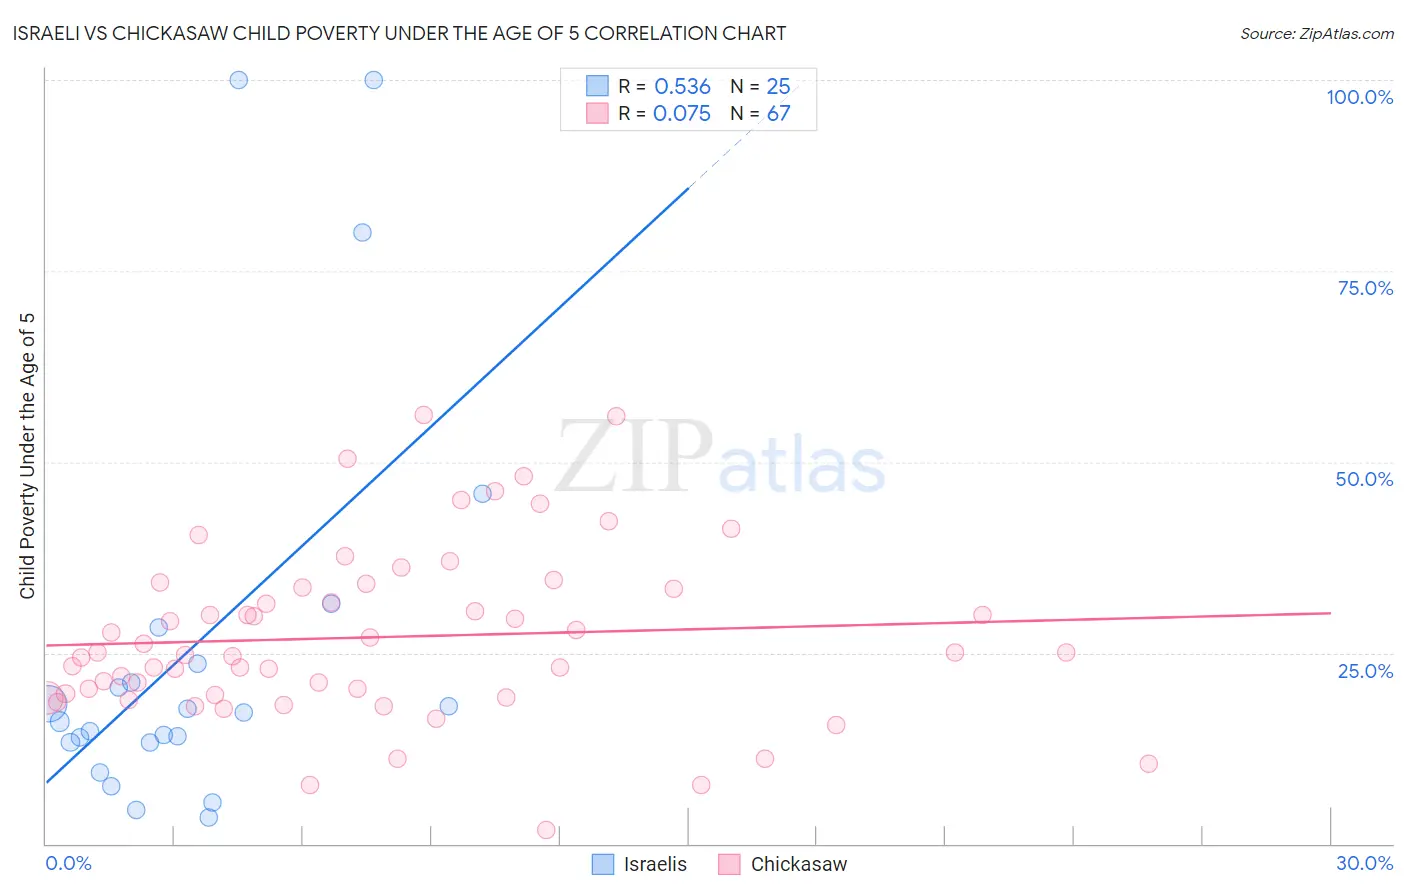 Israeli vs Chickasaw Child Poverty Under the Age of 5